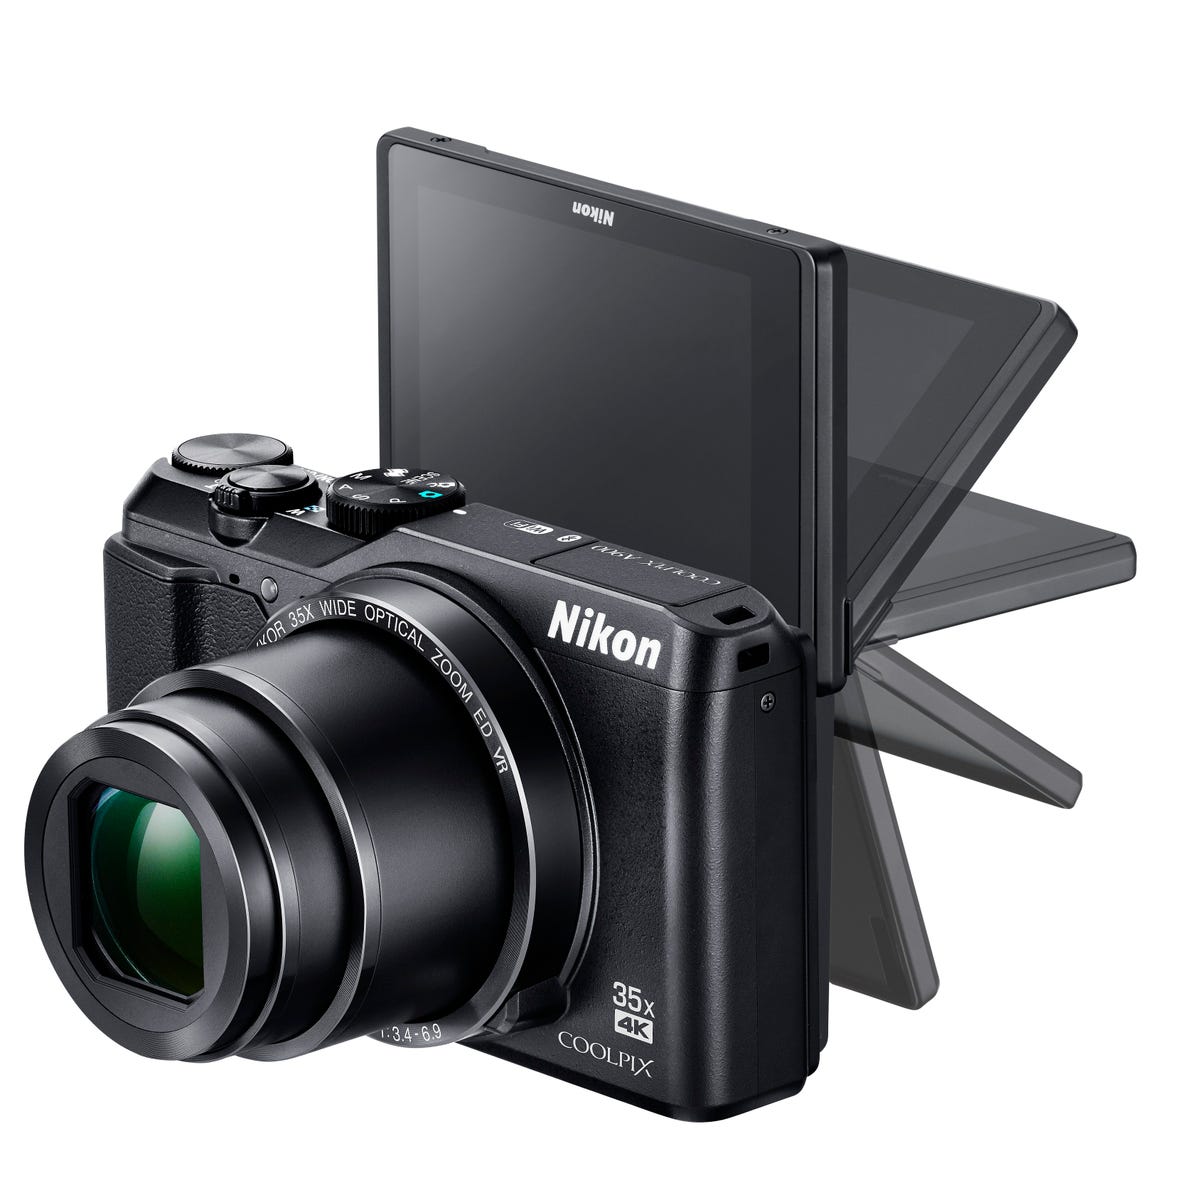 Nikon Coolpix P600 review: Telescope meets point-and-shoot - CNET